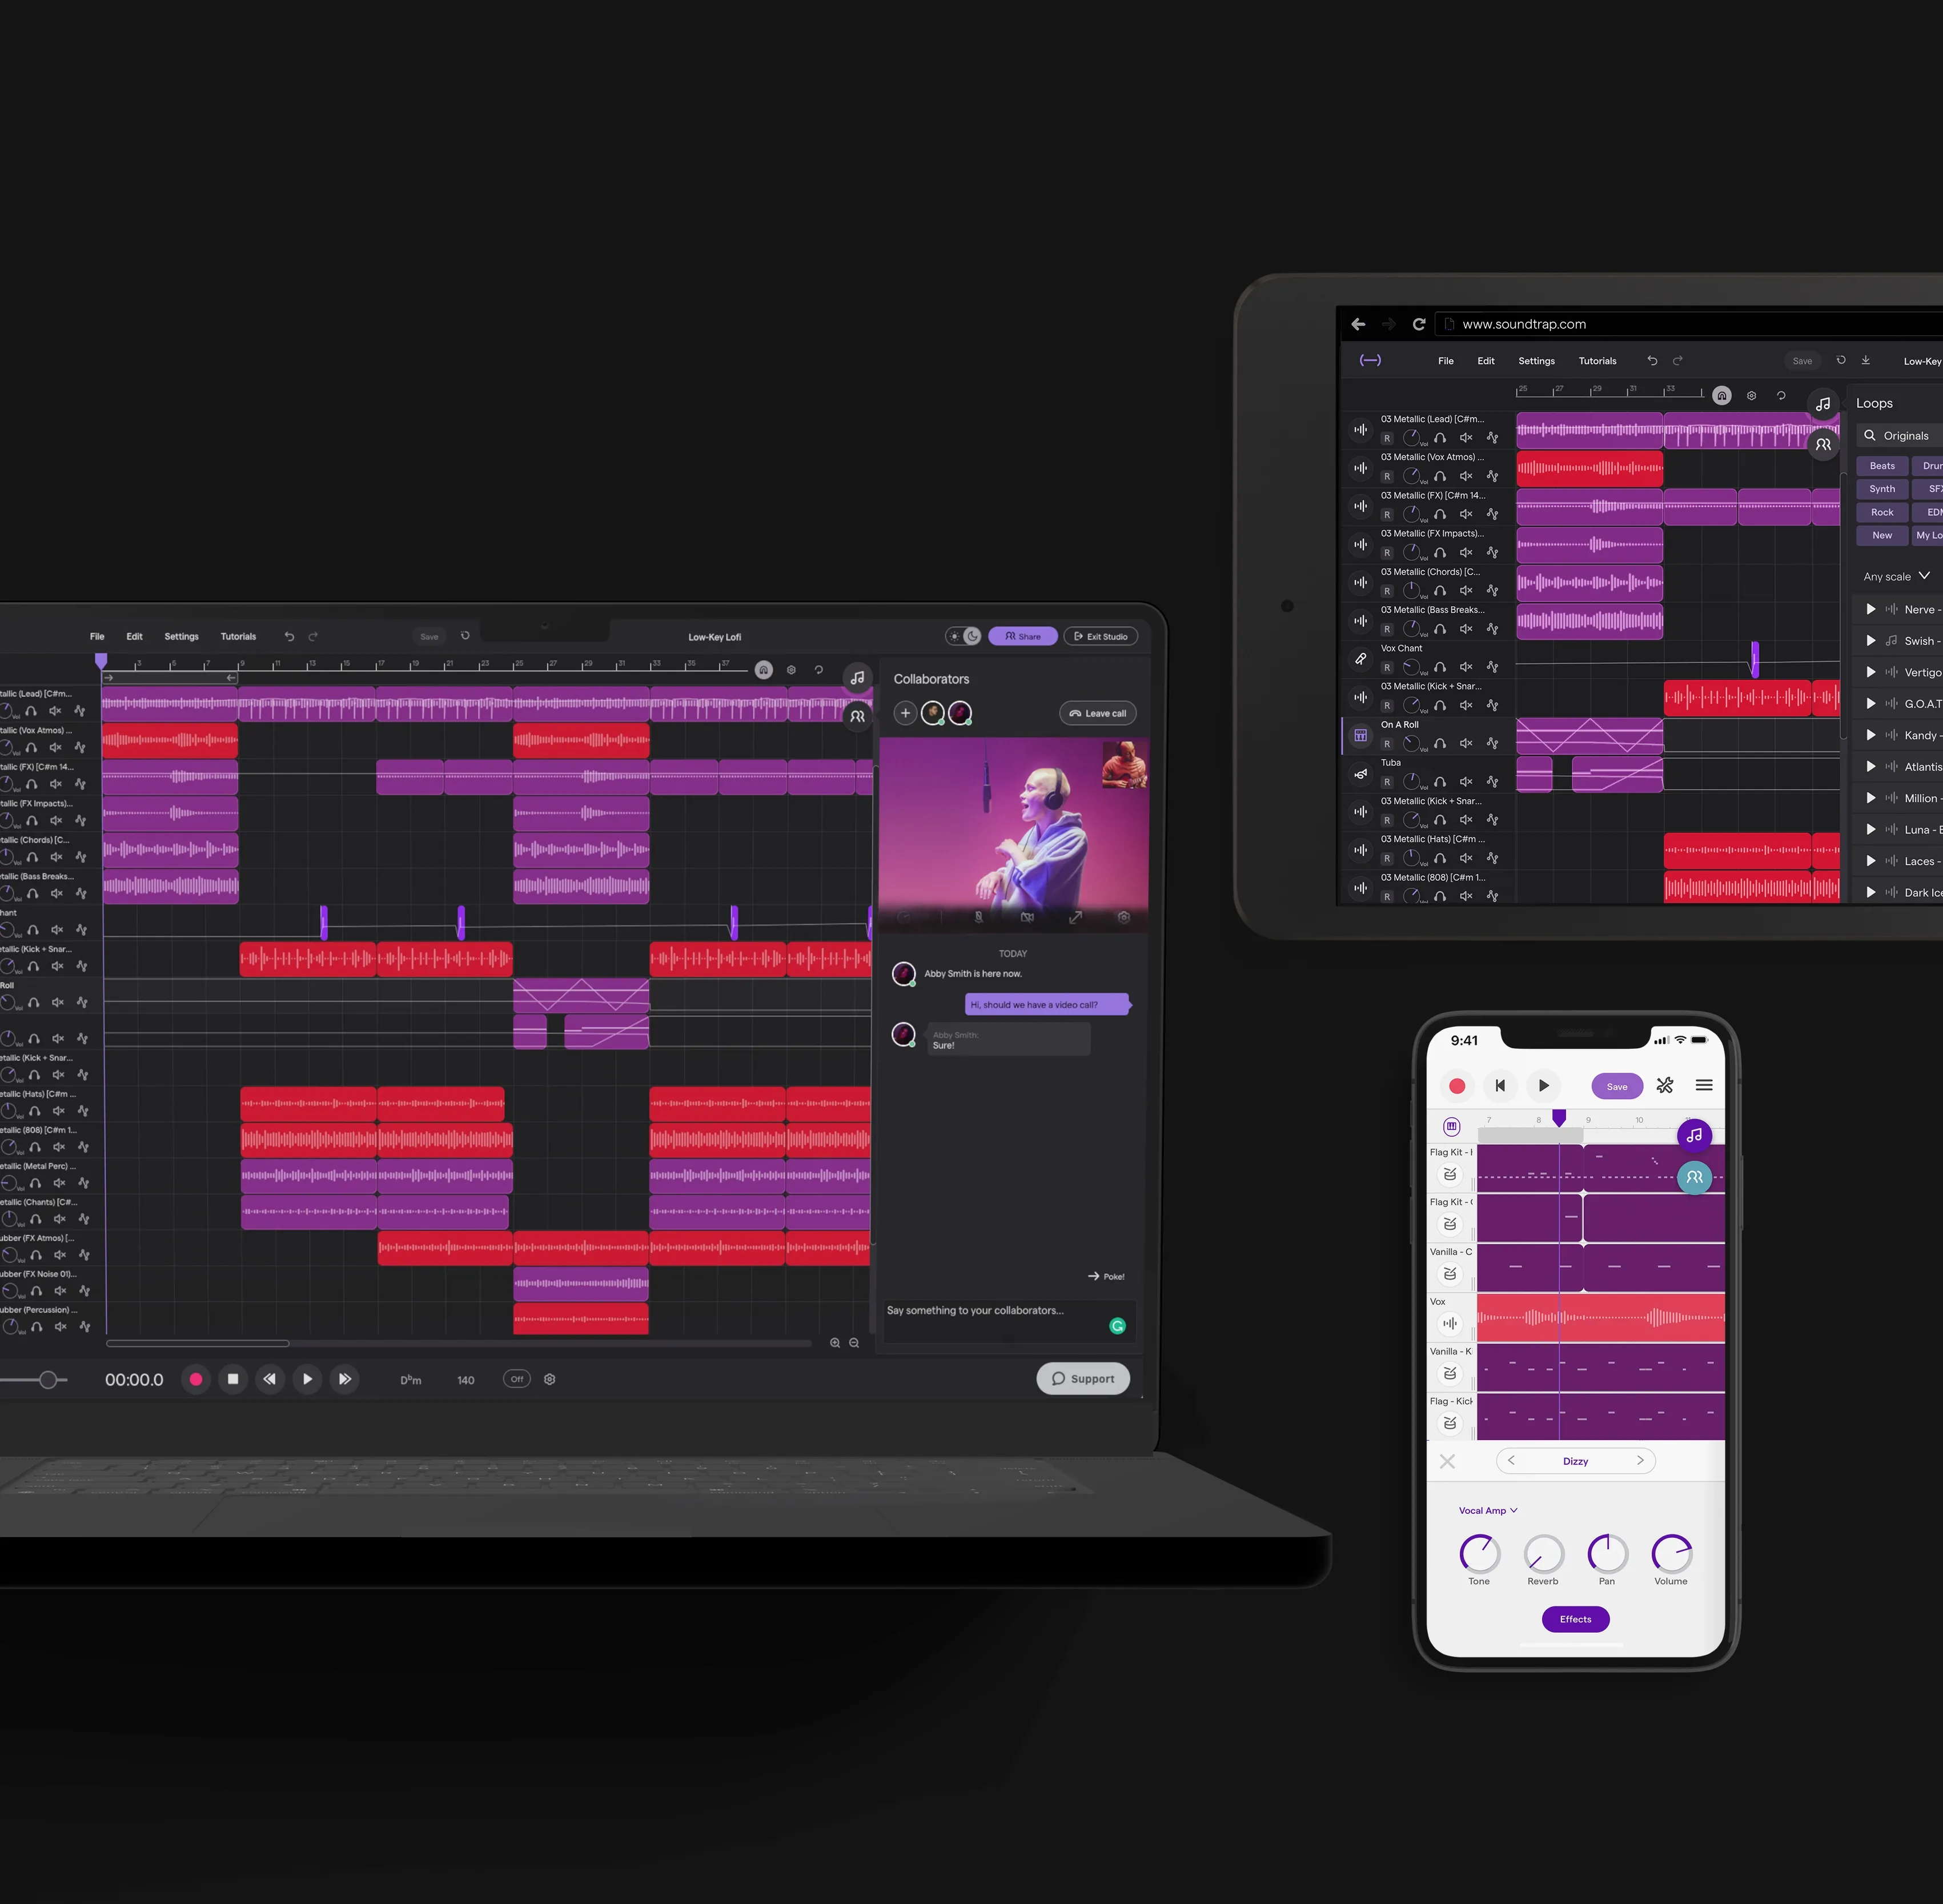 Three devices are shown displaying Soundtrap Studio: a laptop, a mobile device, and an iPad/tablet. The studio is shown in dark mode on the laptop and iPad/tablet, and it is shown in light mode on the mobile. This is a graphic image. It has a black background behind the three devices.